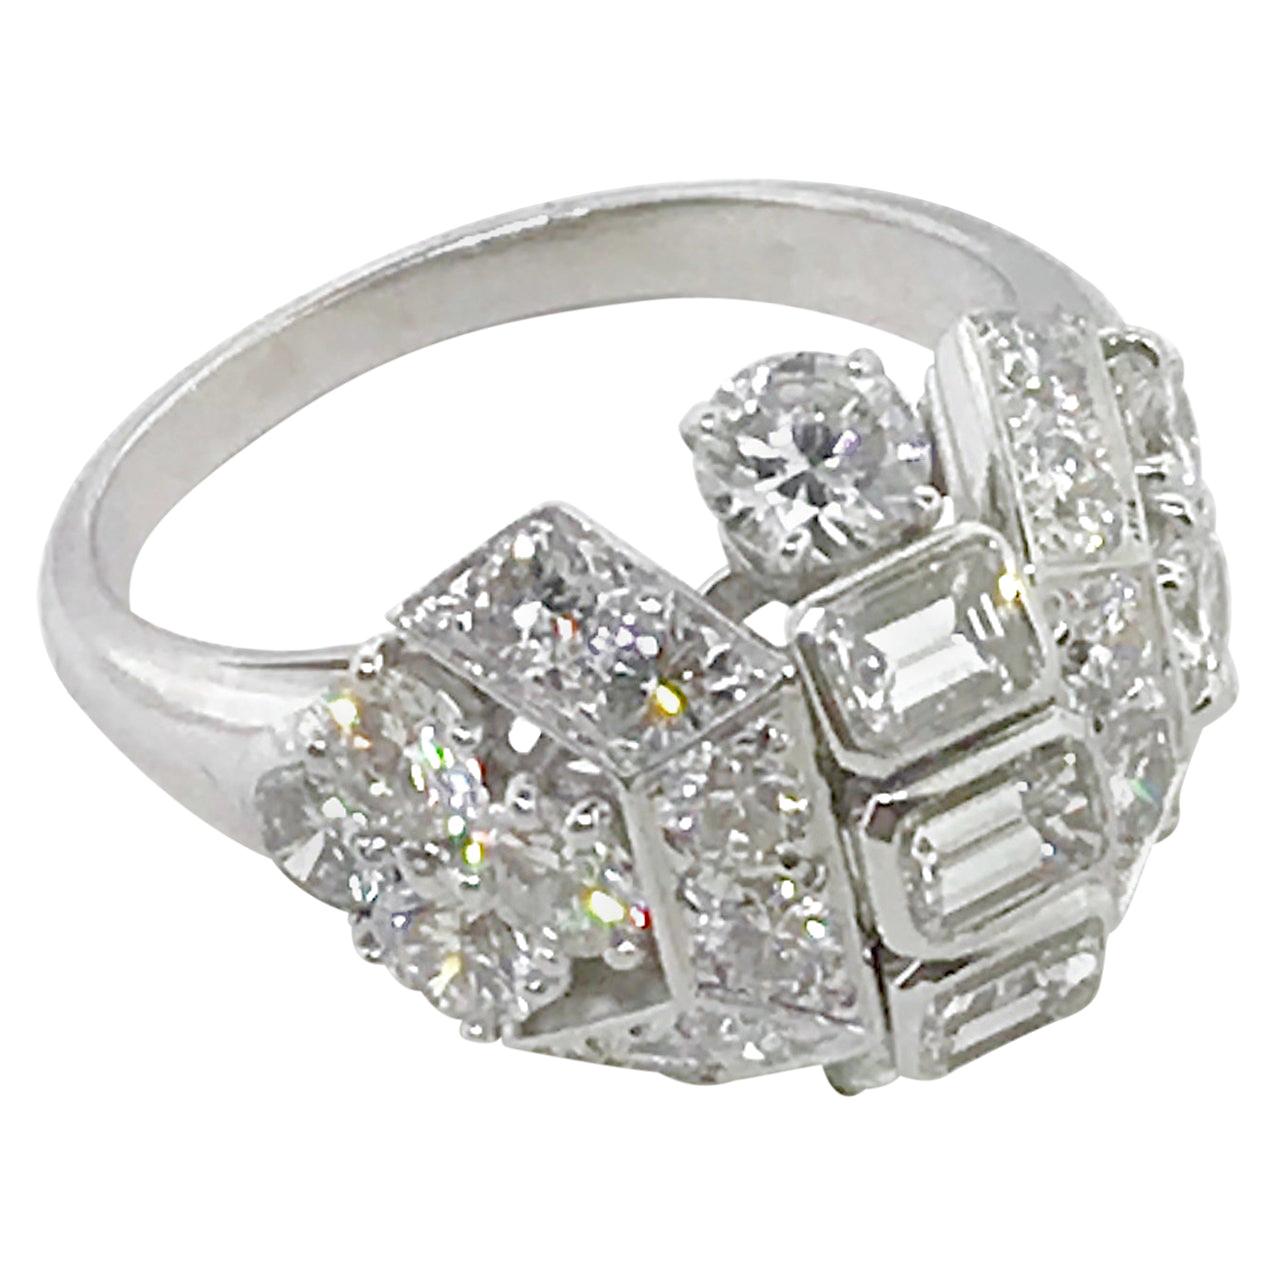 Rare Diamond Cluster Ring by Collingwood Jewelers of Princess Di Fame